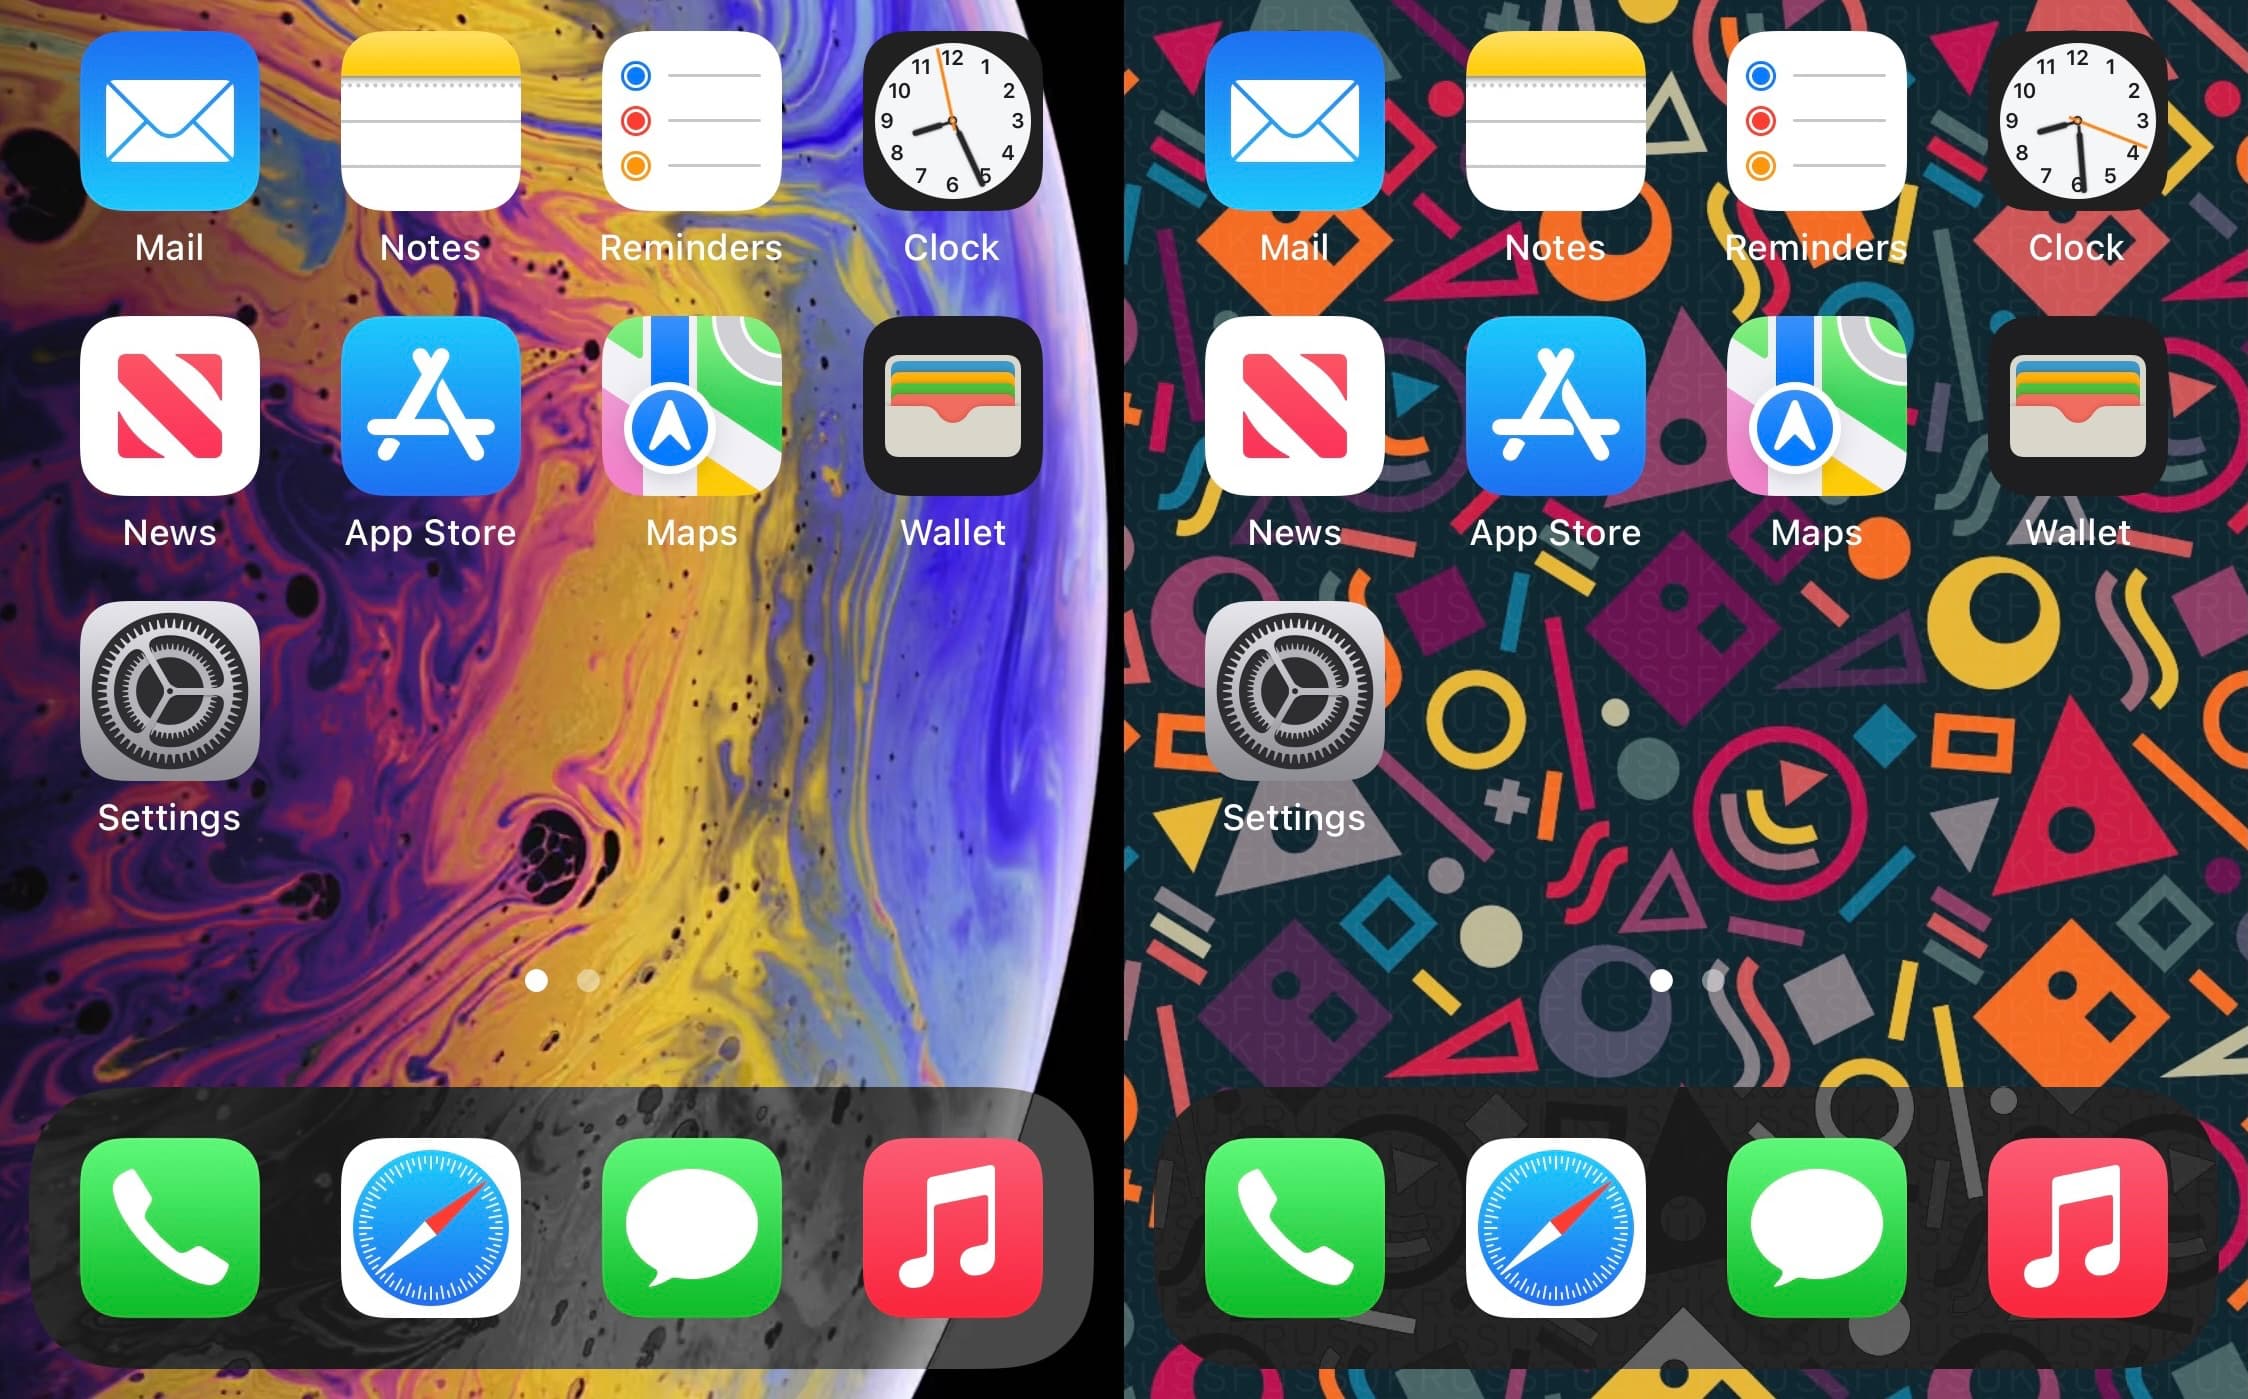 Give your Home Screen’s Dock an awesome aesthetic with Negative Dock